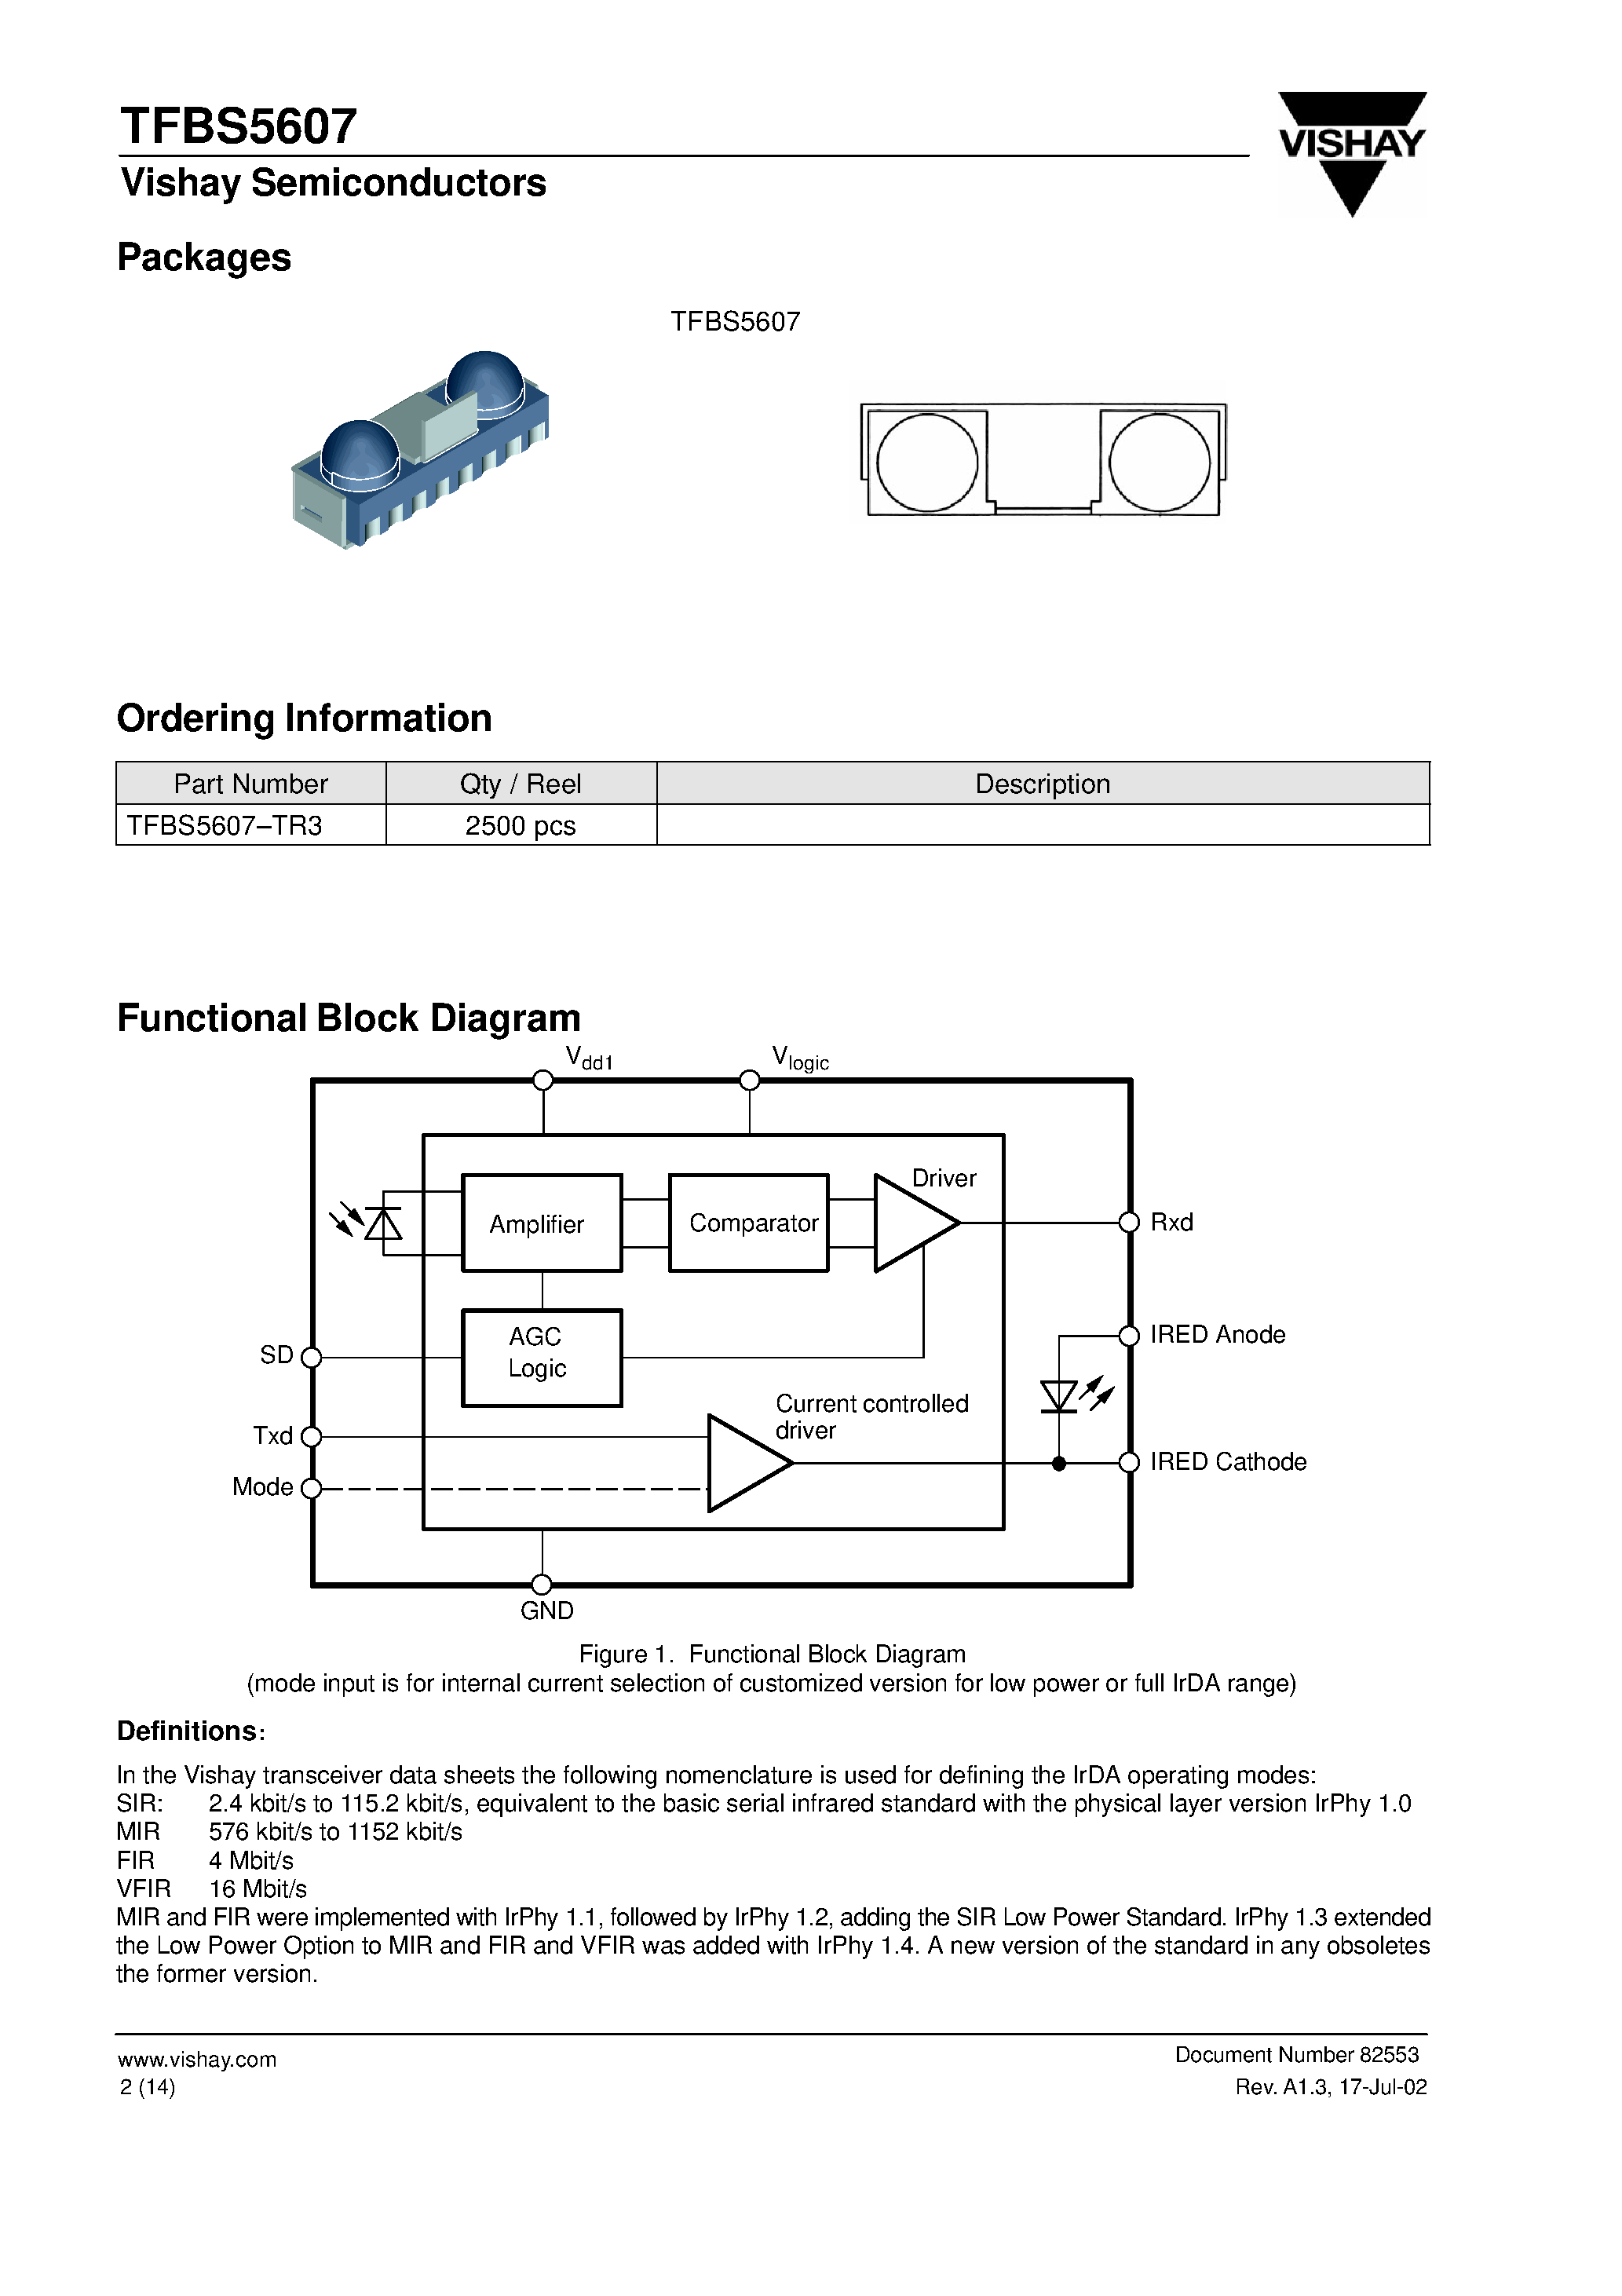 Datasheet TFBS5607-TR3 - Integrated Low Profile Transceiver Module for Telekom Applications 9.6 kbit/s to 1.152 Mbit/s Data Transmission Rate page 2